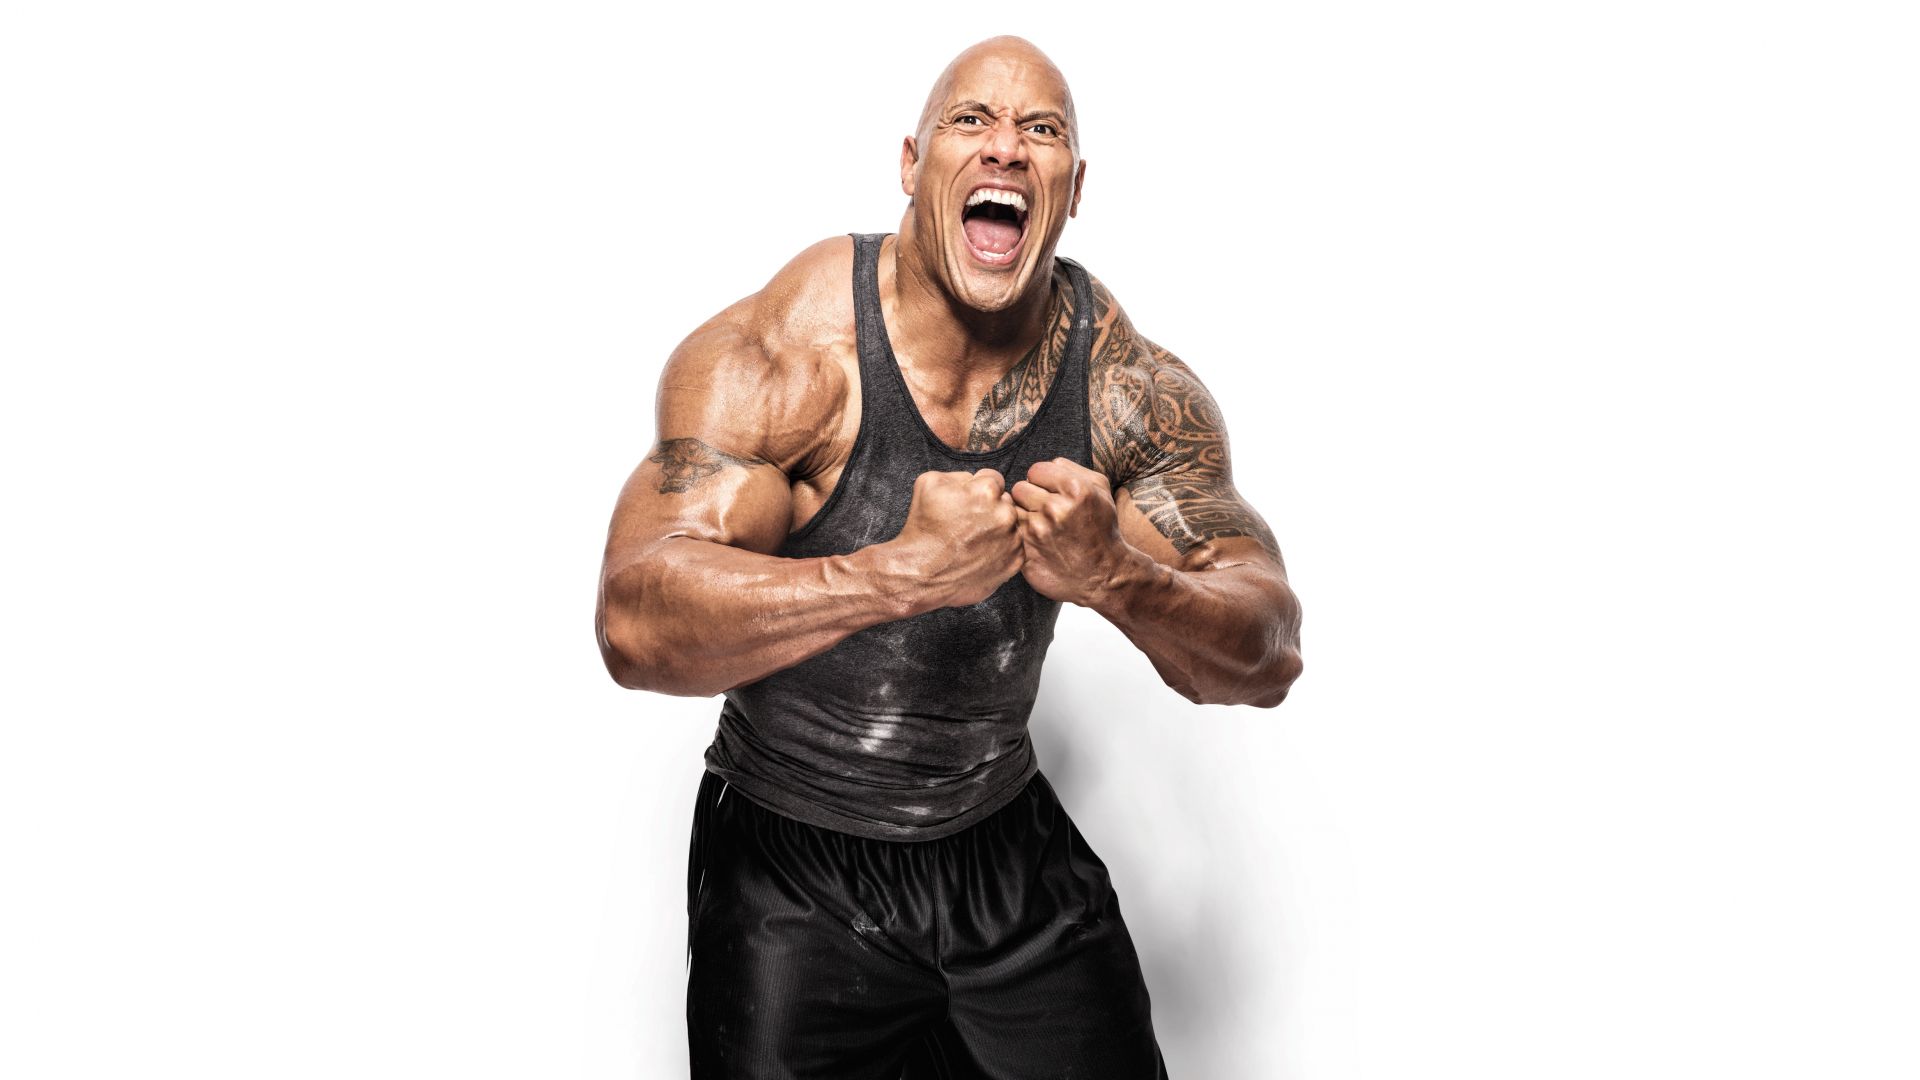 Dwayne johnson, actor, tattoo, exercise wallpaper, HD image, picture, background, 877703